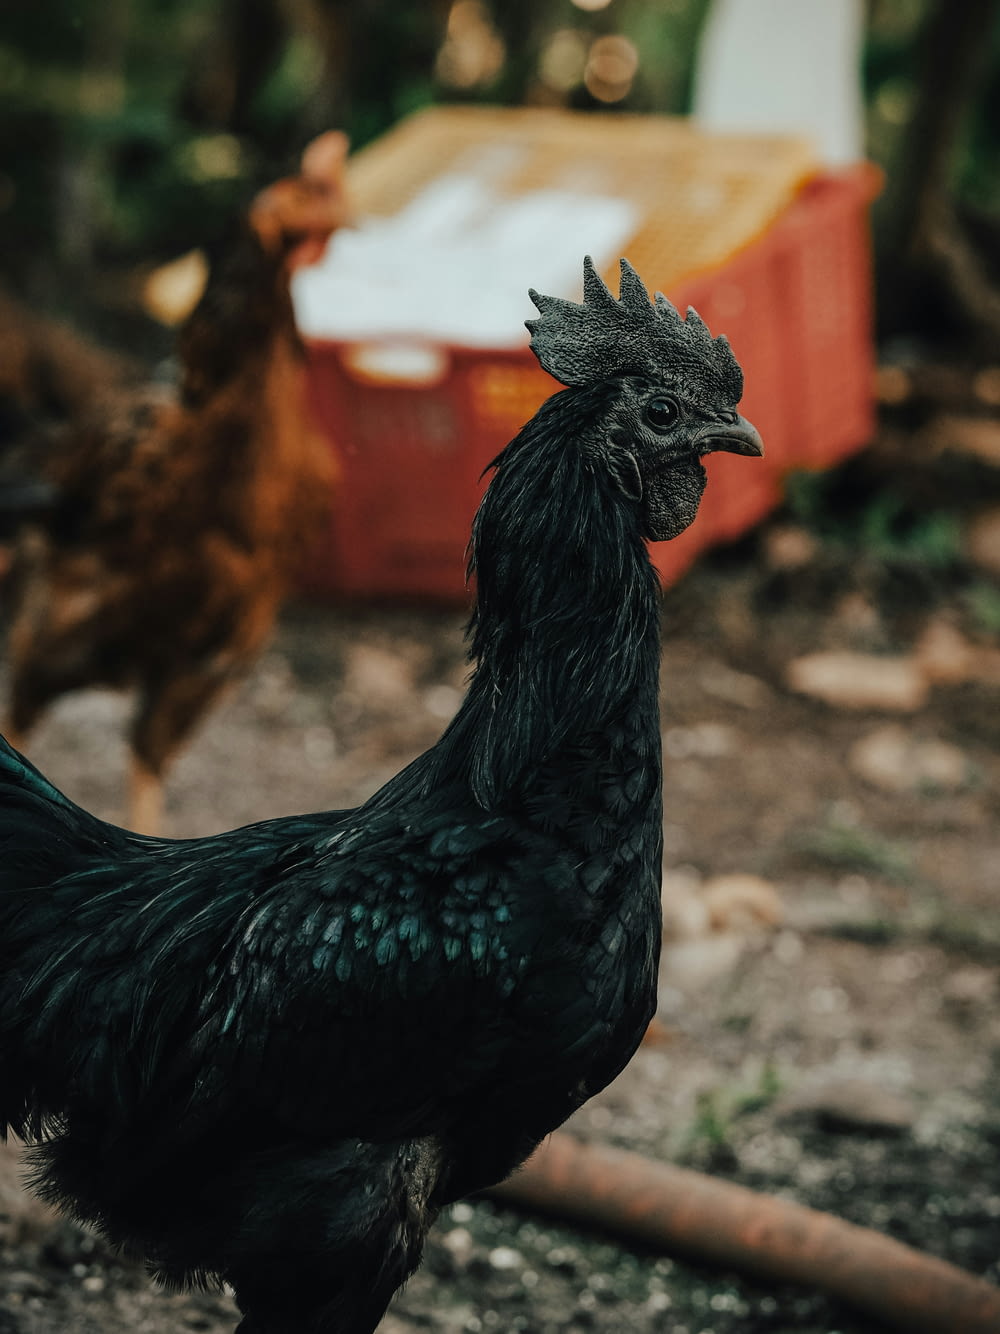 a close up of a rooster on a dirt ground